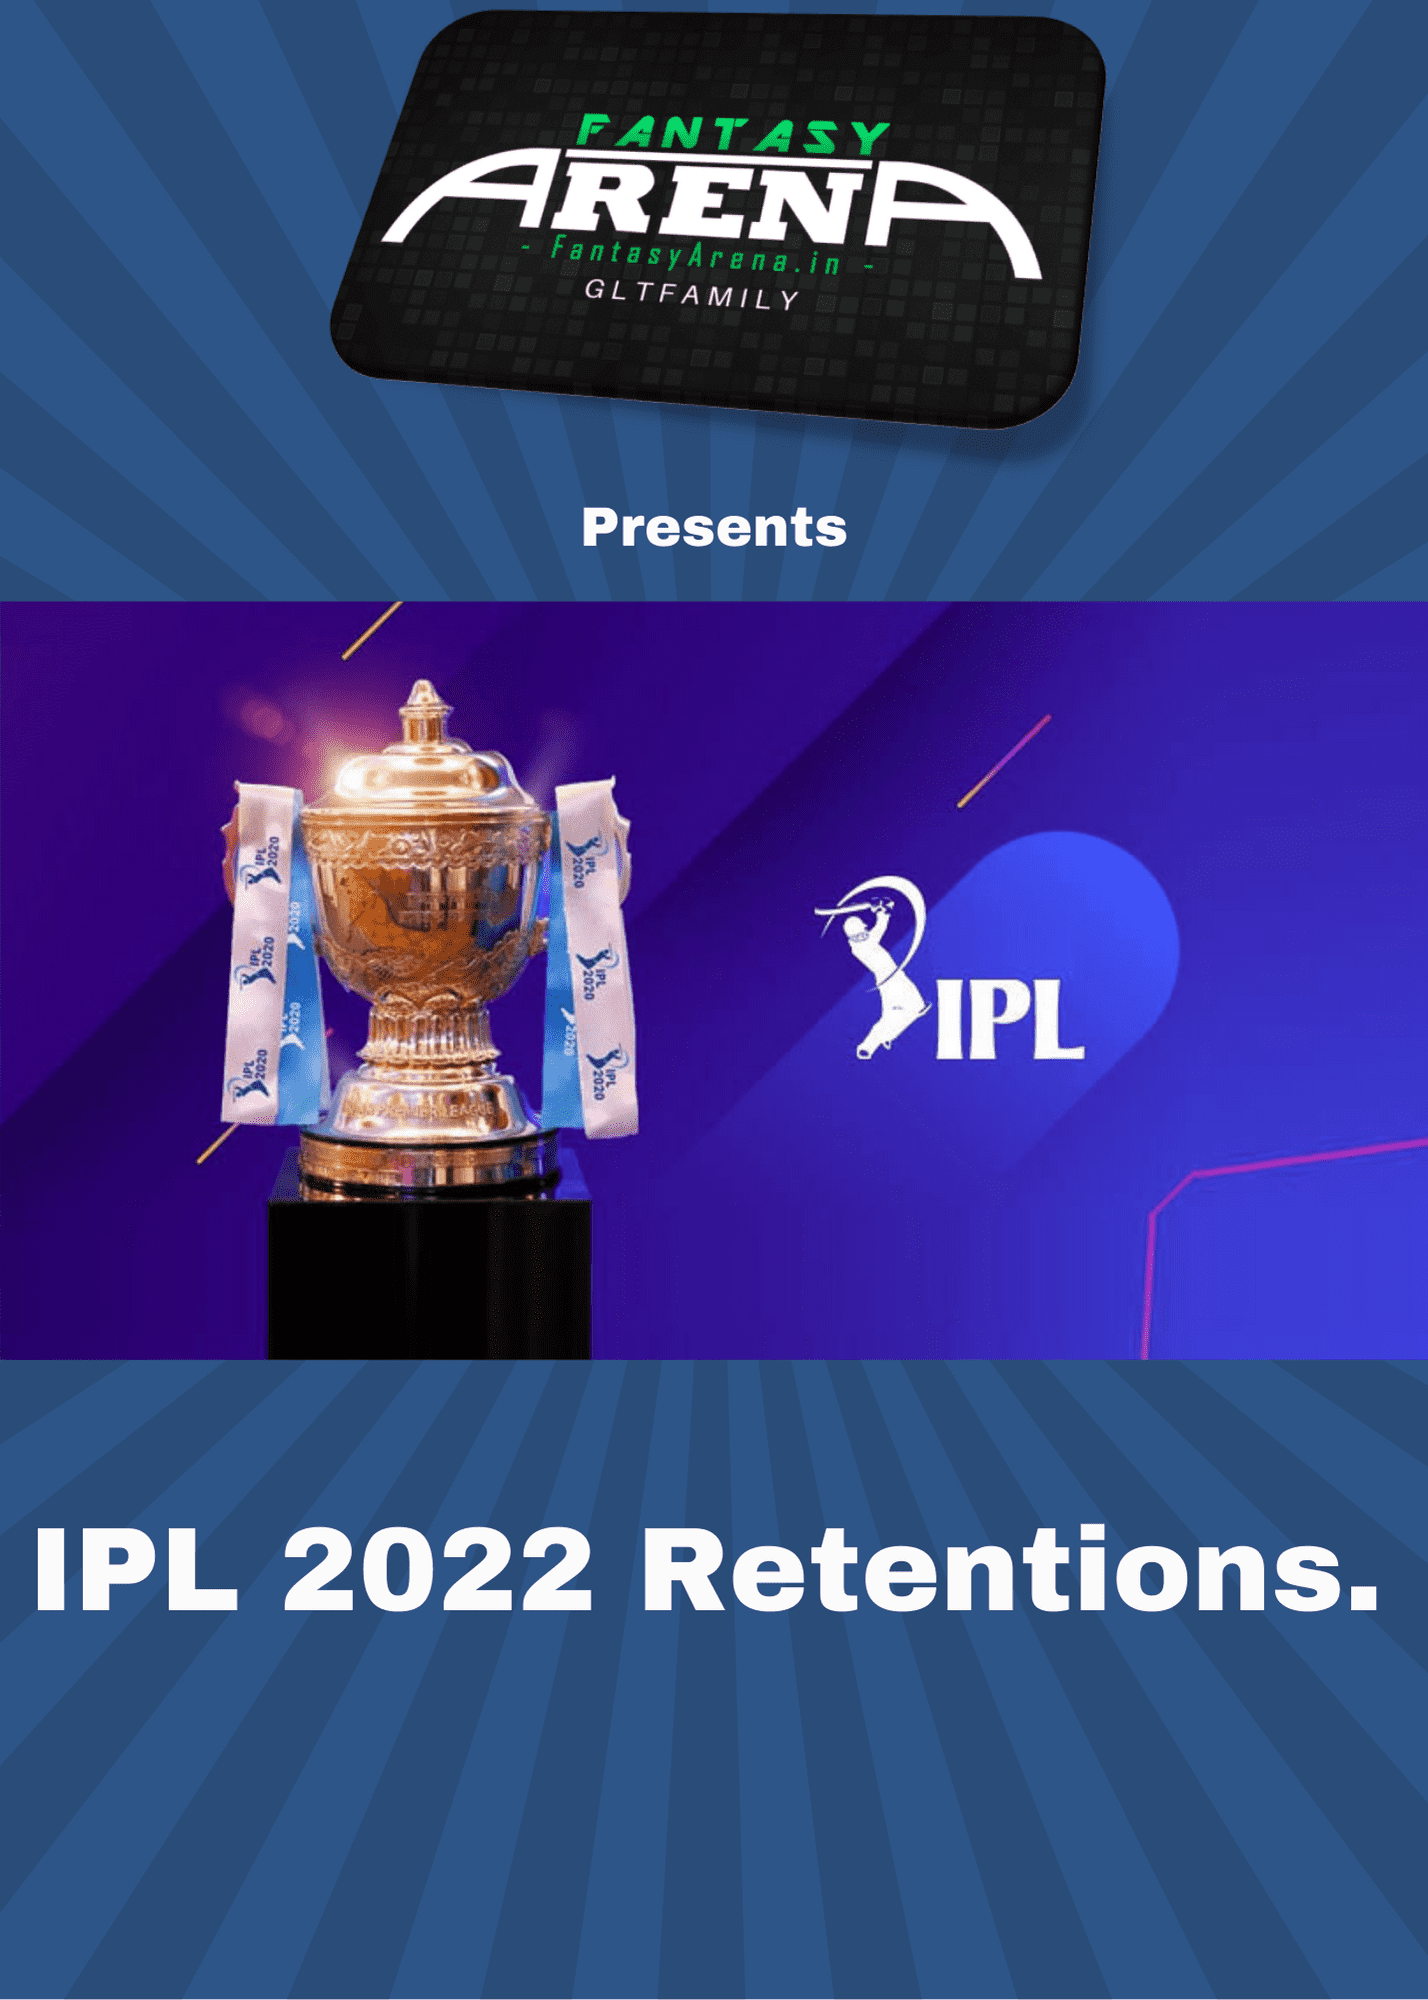 All you need to know about IPL 2022 Retentions.